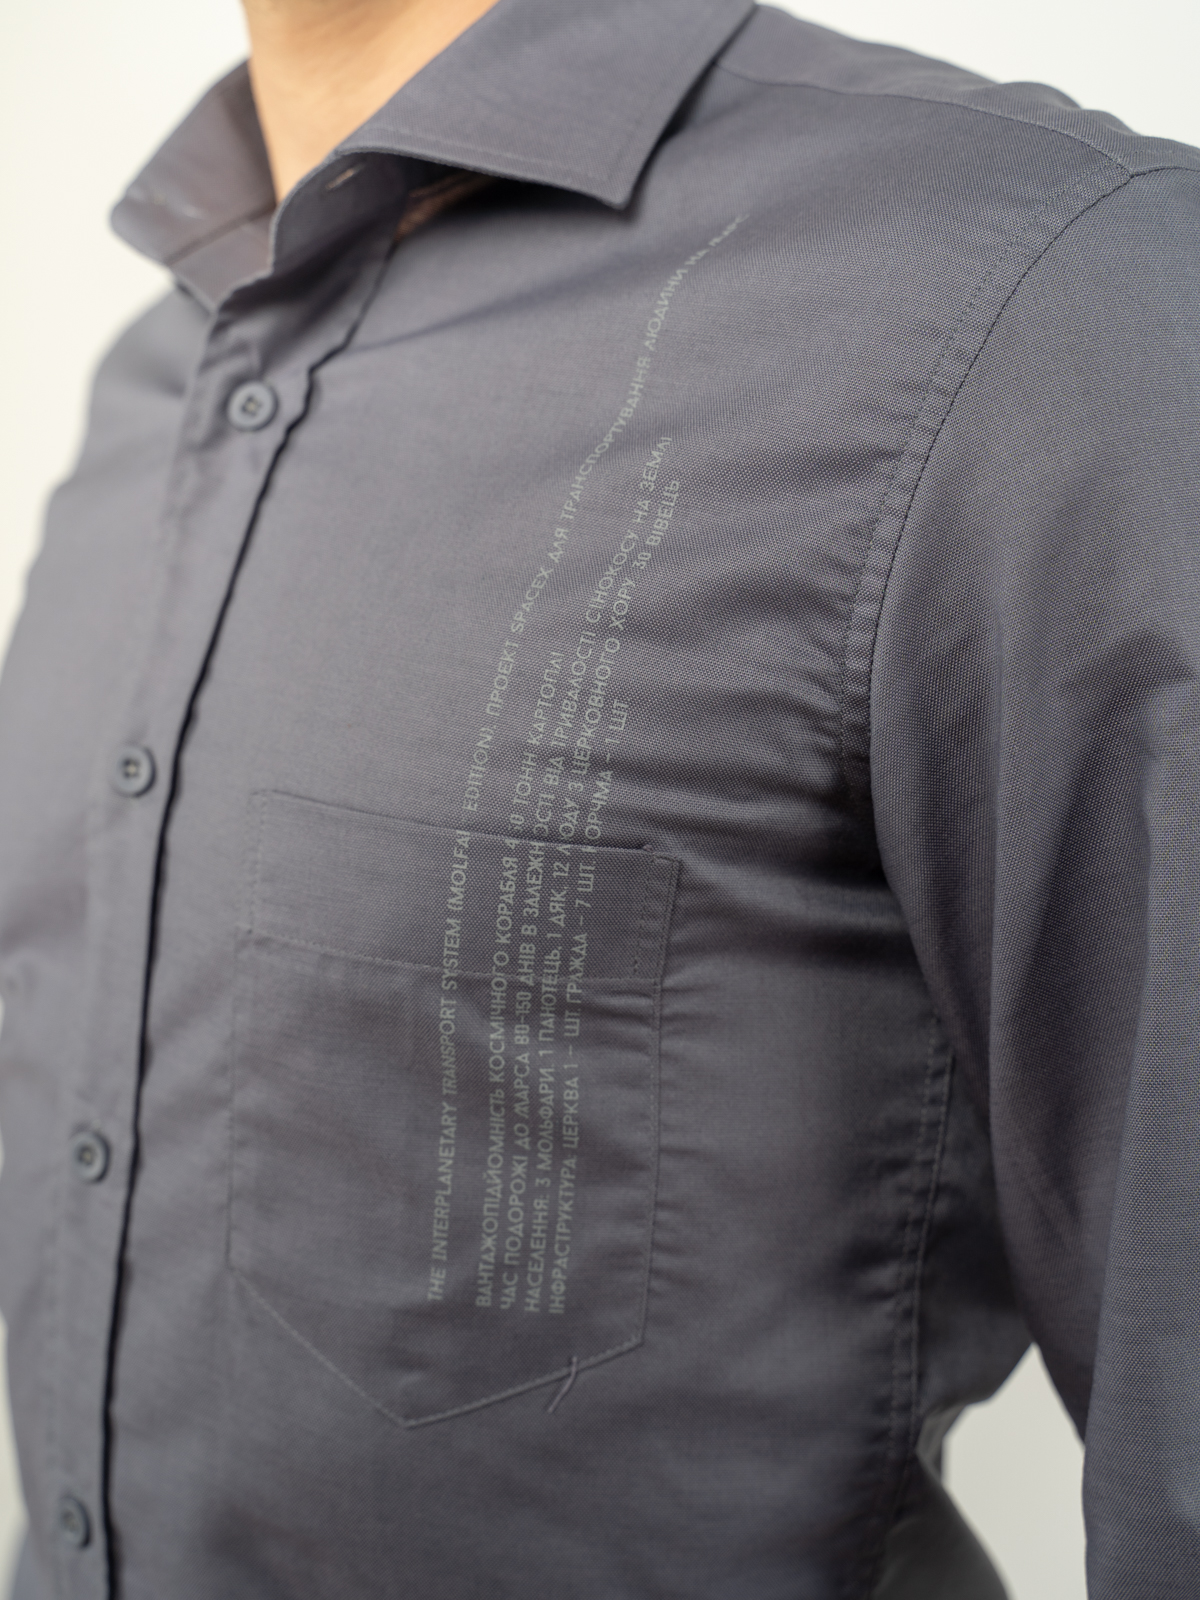 Men's Shirt Molfar-X. Color gray. 
Size worn by the model: М.